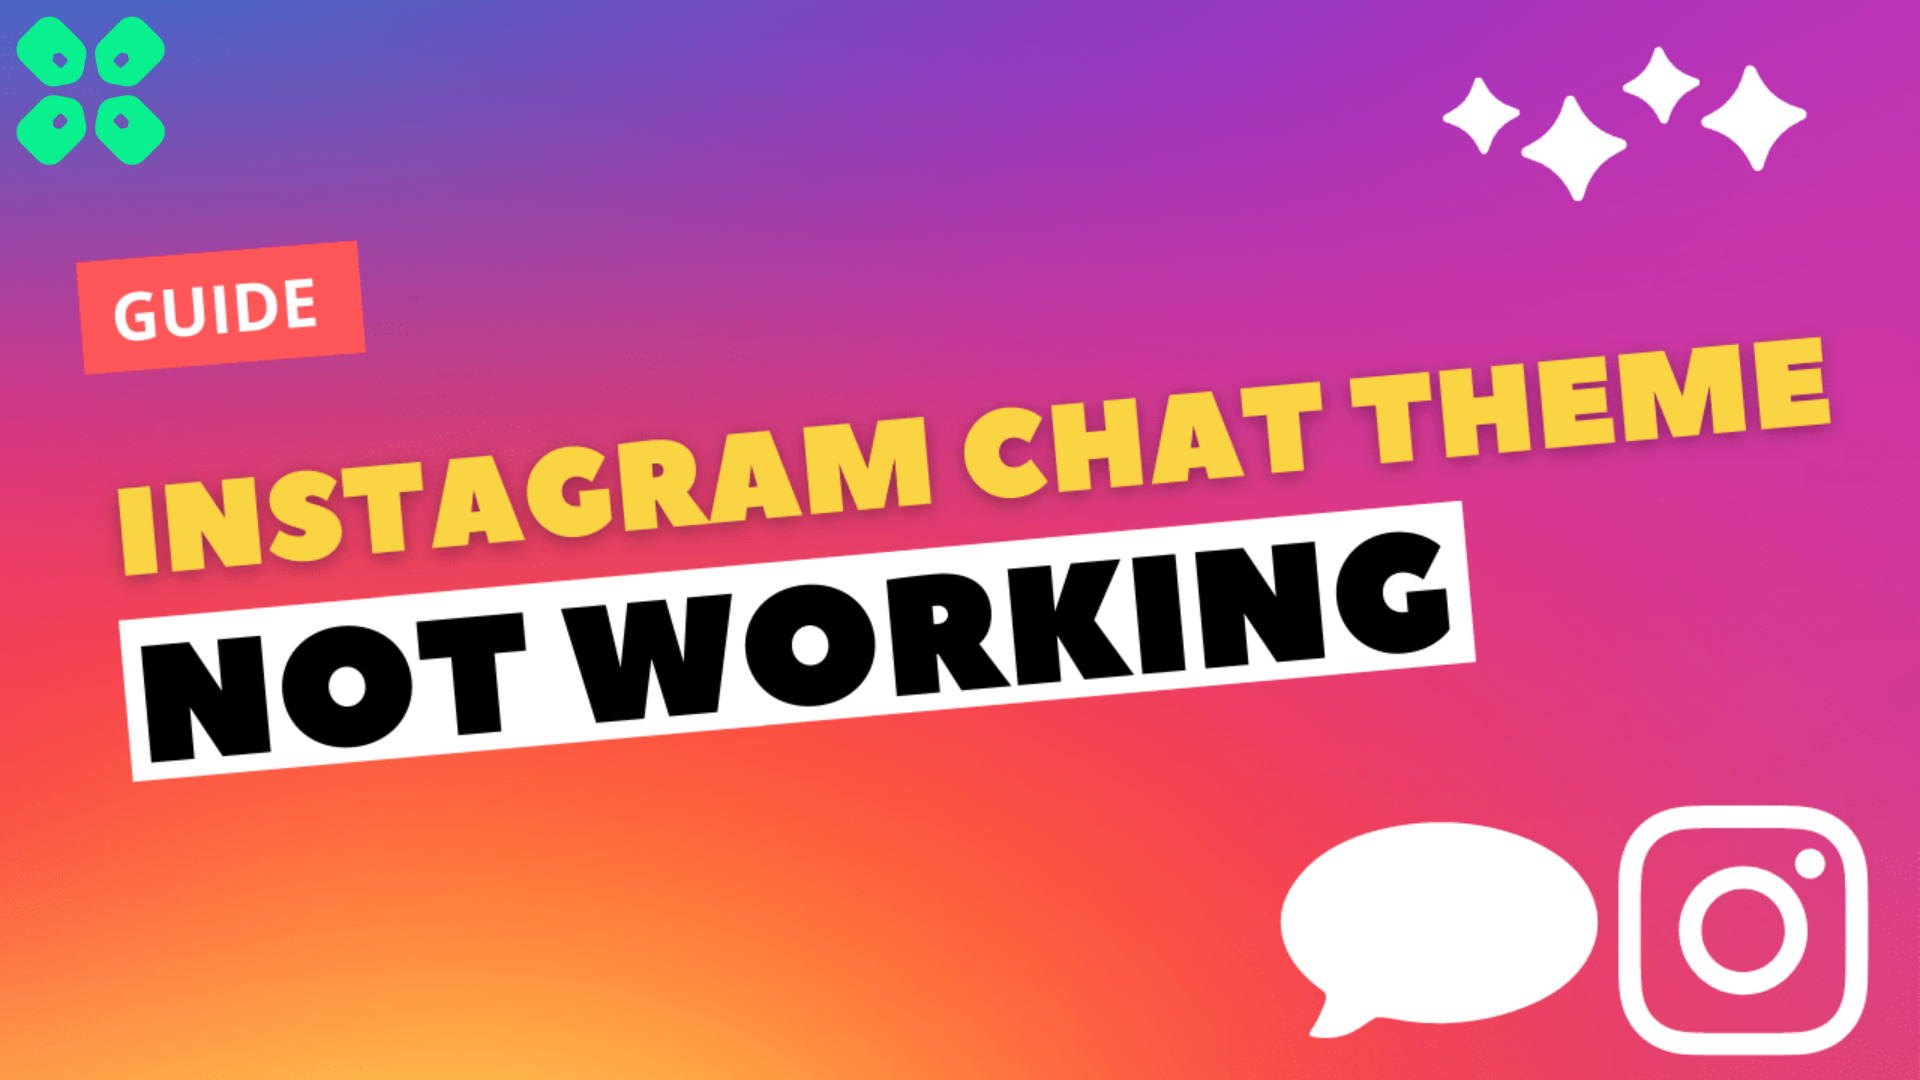 How to Fix Instagram Chat Theme Not Working